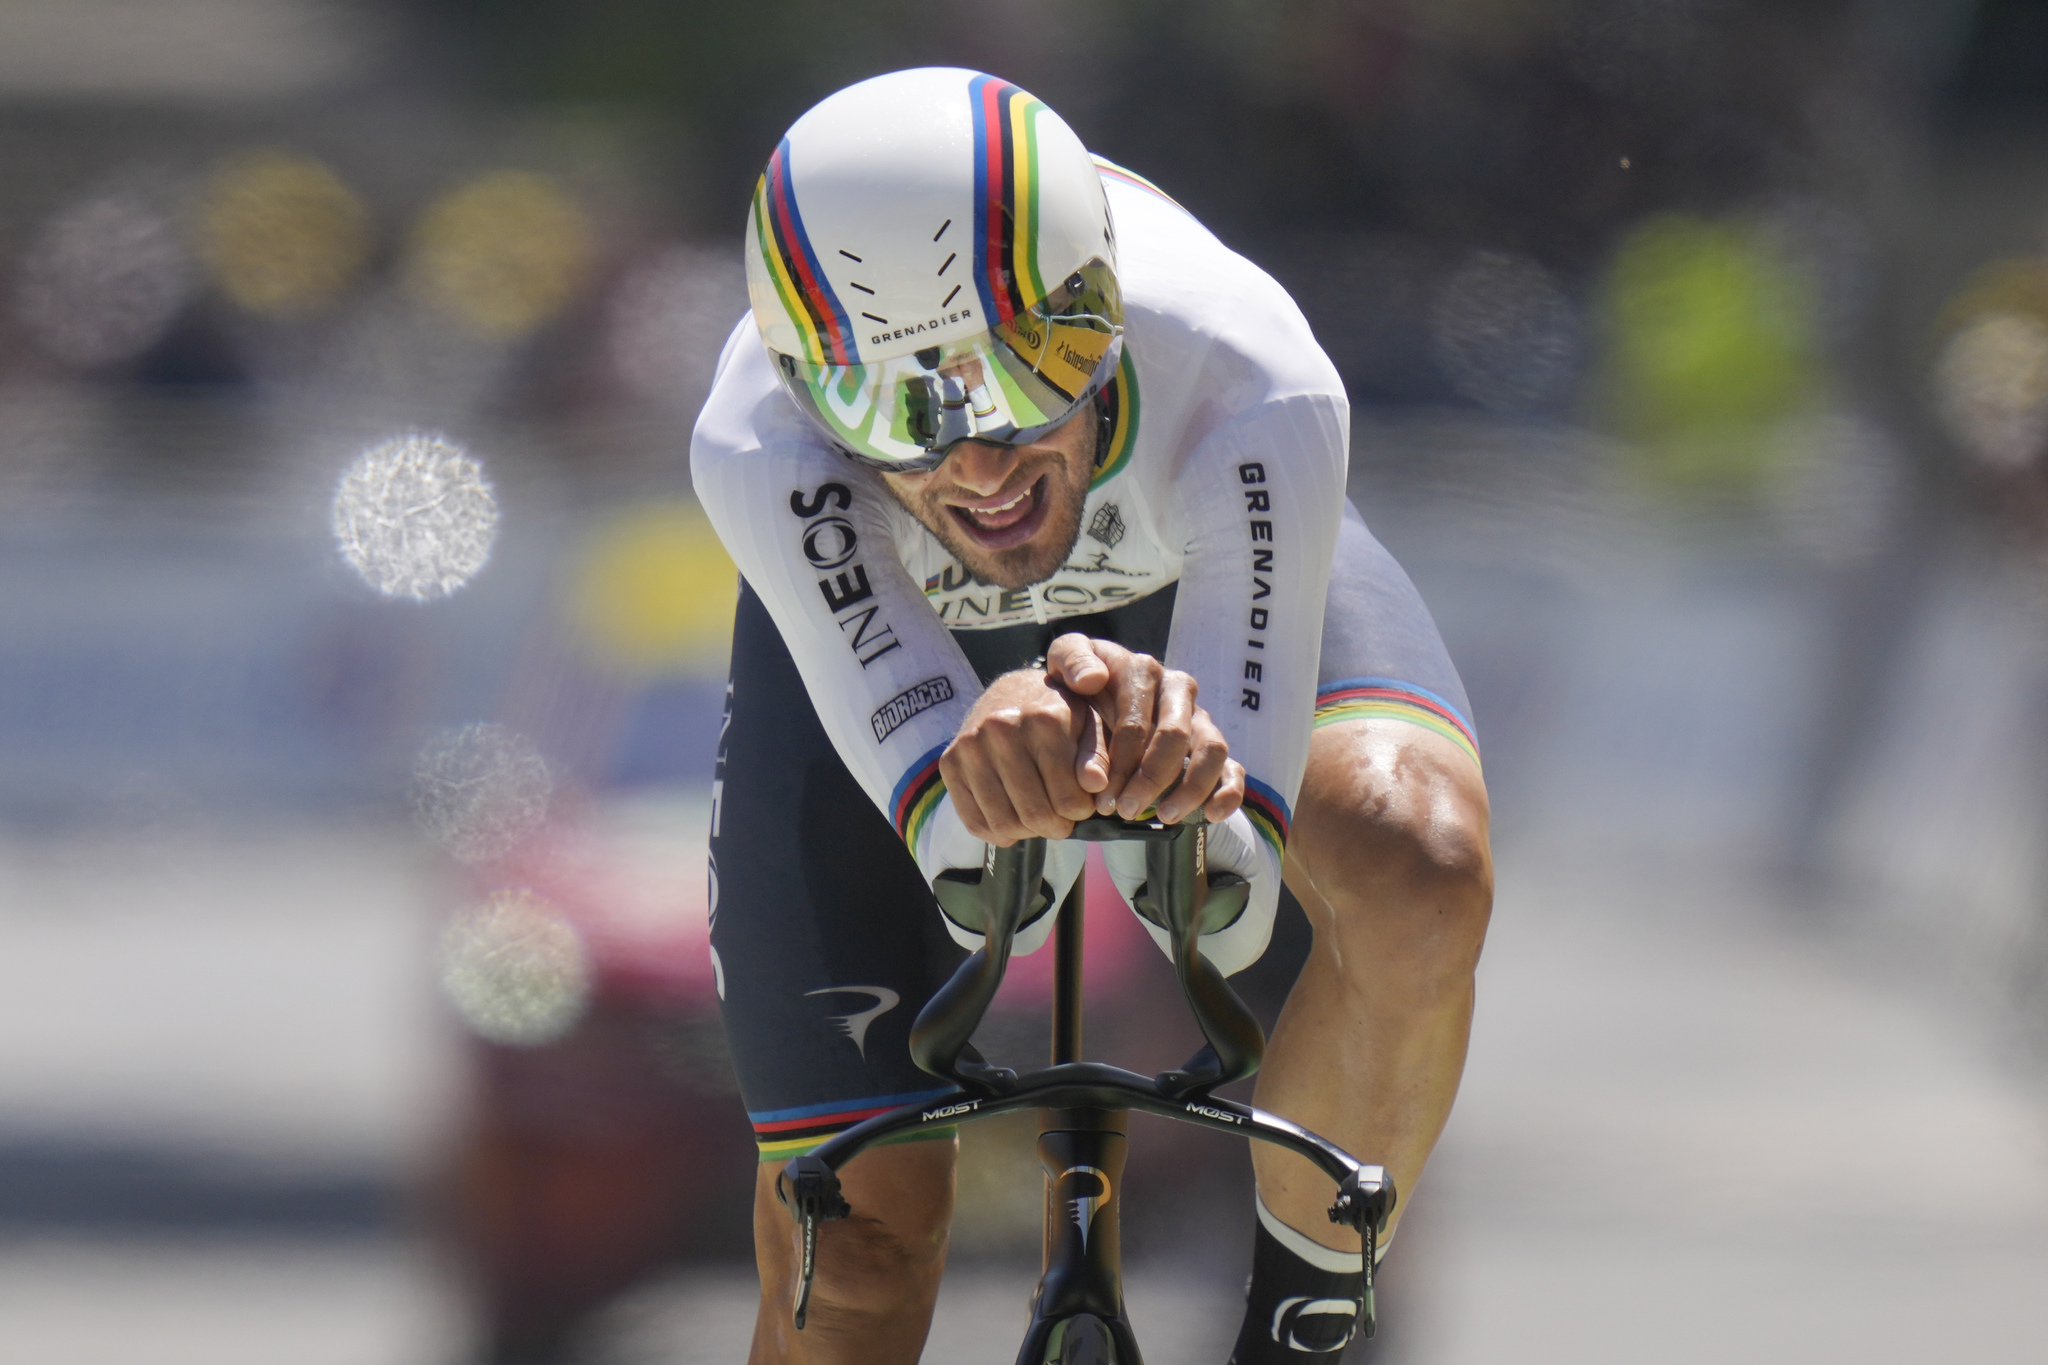 Italy's Filippo  lt;HIT gt;Ganna lt;/HIT gt; crosses the finish line during the twentieth stage of the Tour de France cycling race, an individual time trial over 40.7 kilometers (25.3 miles) with start in Lacapelle-Marival and finish in Rocamadour, France, Saturday, July 23, 2022. (AP Photo/Thibault Camus)